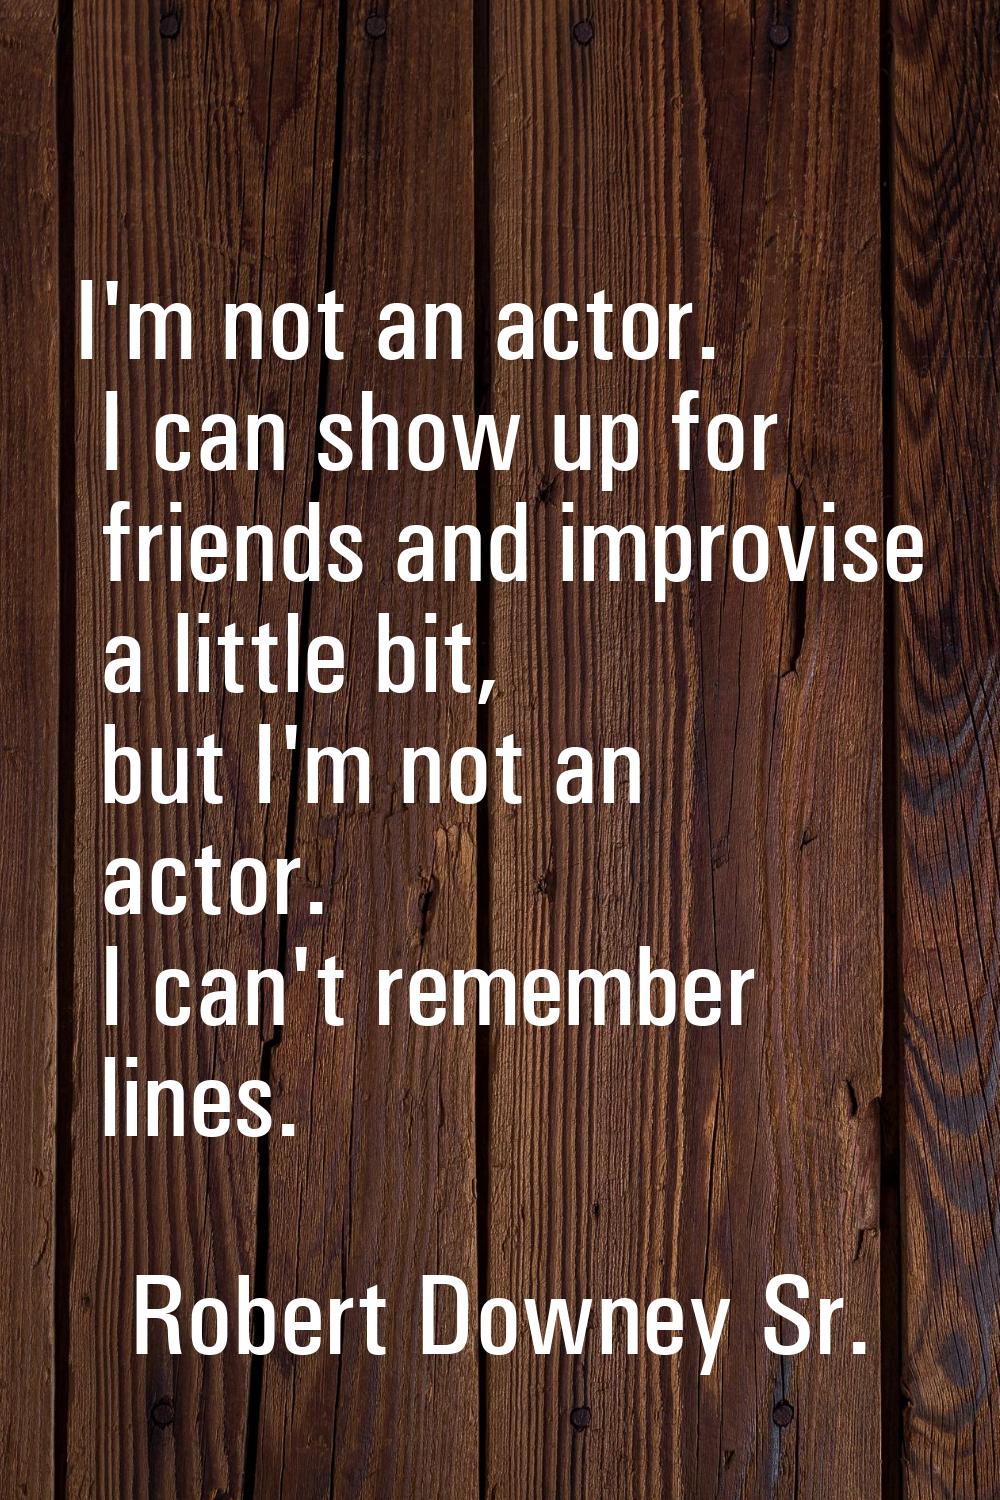 I'm not an actor. I can show up for friends and improvise a little bit, but I'm not an actor. I can